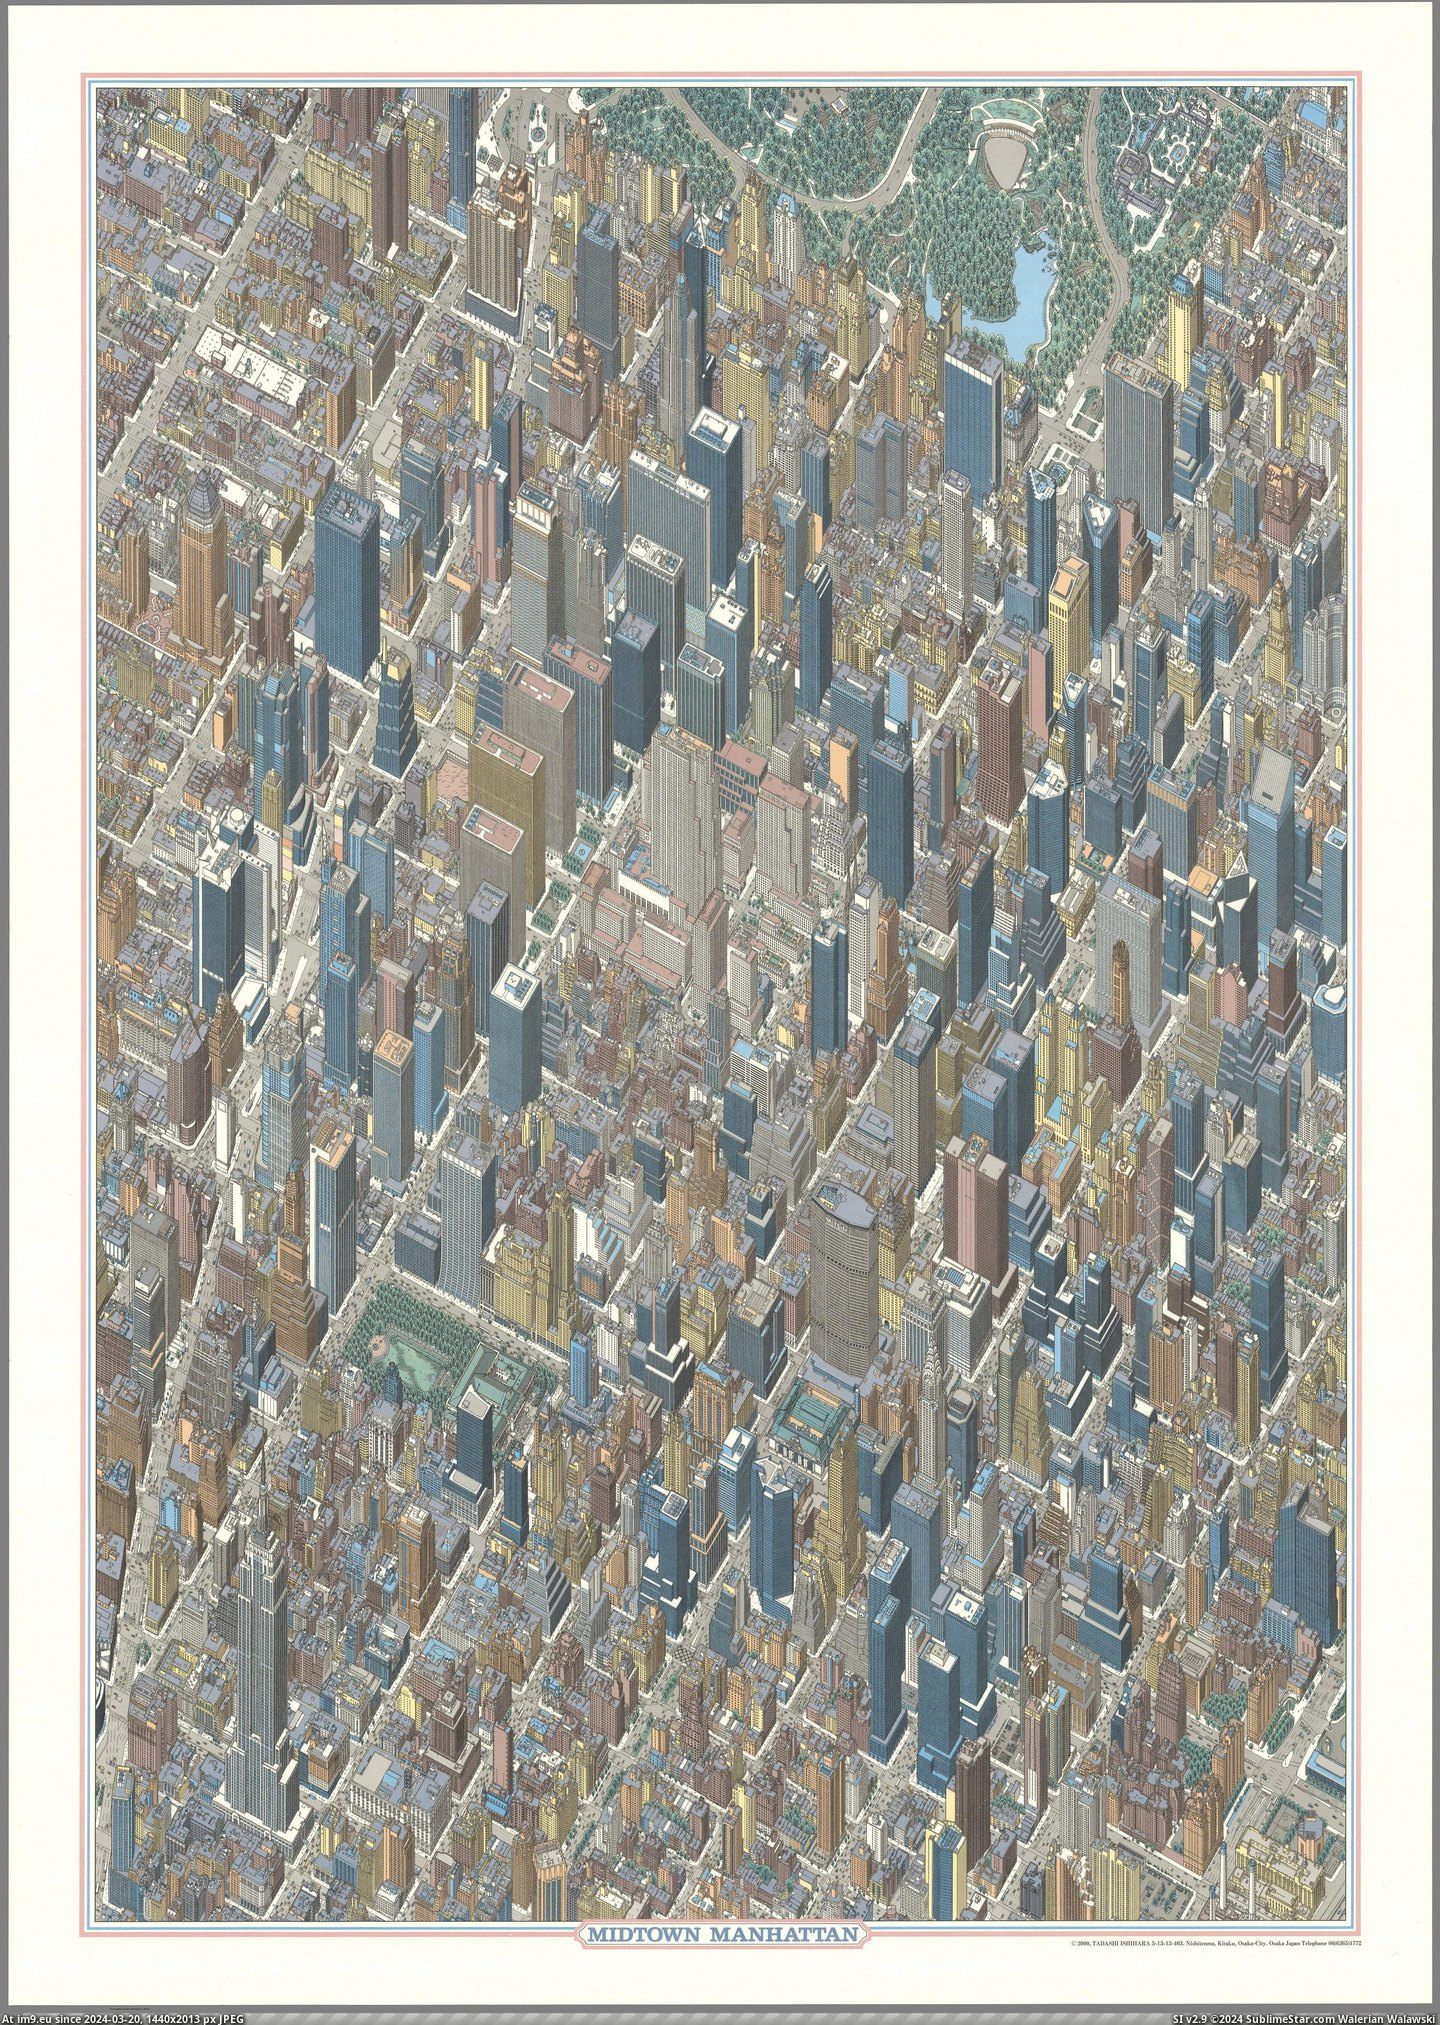 #Hentai #Nyc #Drawing #Papertowns #Tadashi #Manhattan #Midtown #Ishihara [Mapporn] Drawing of Midtown Manhattan, made by: Tadashi Ishihara (2000)[3028x4245] ( -r-papertowns and -r-nyc) Pic. (Image of album My r/MAPS favs))